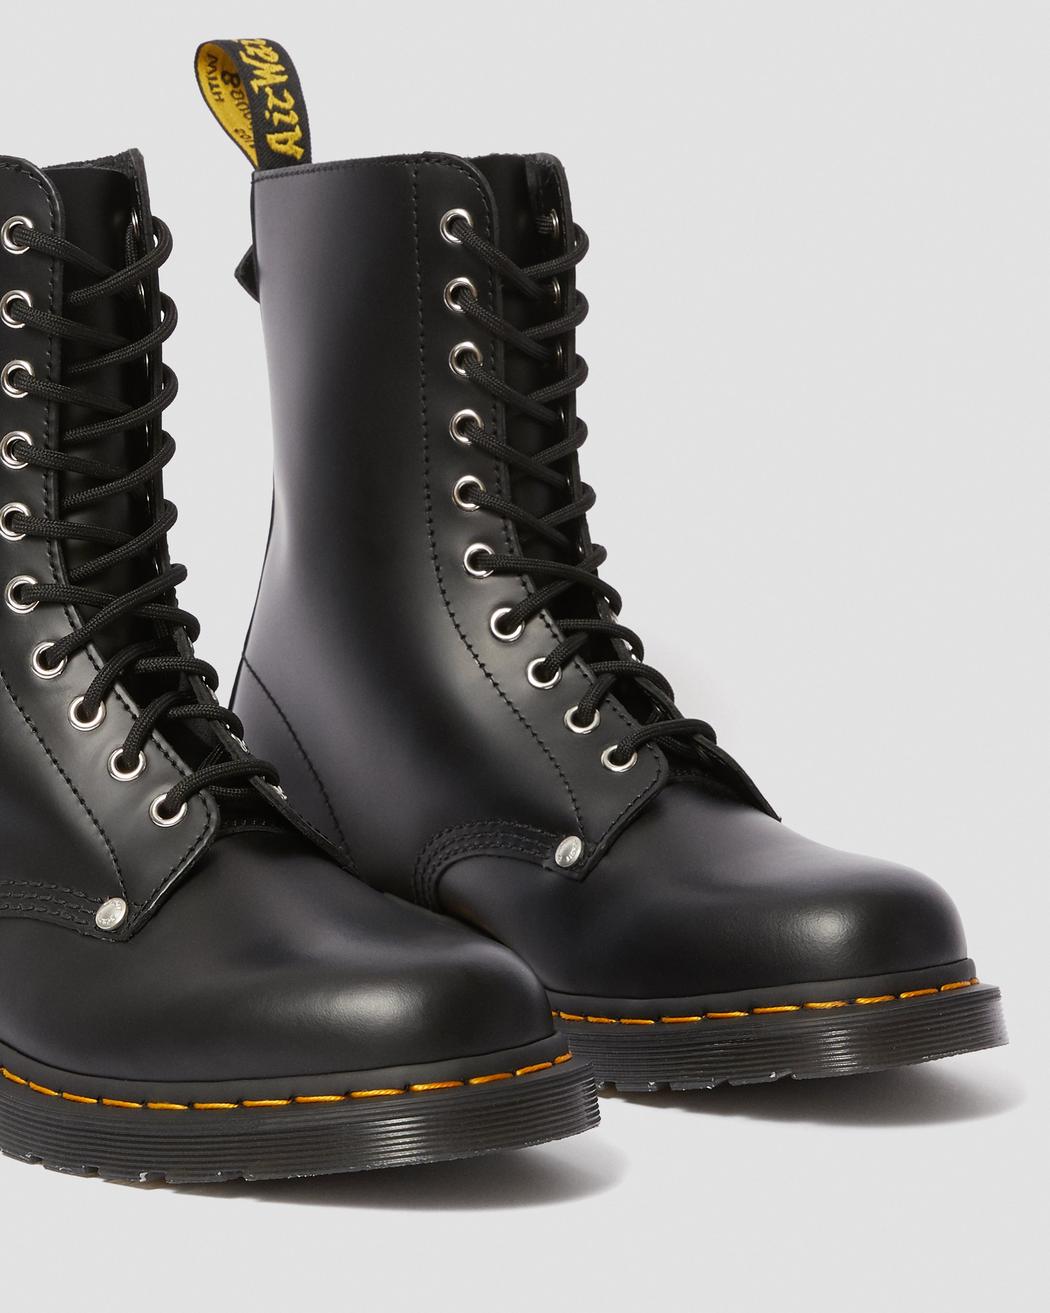 1490 SCHOTT SMOOTH LEATHER HIGH BOOTS | Dr. Martens